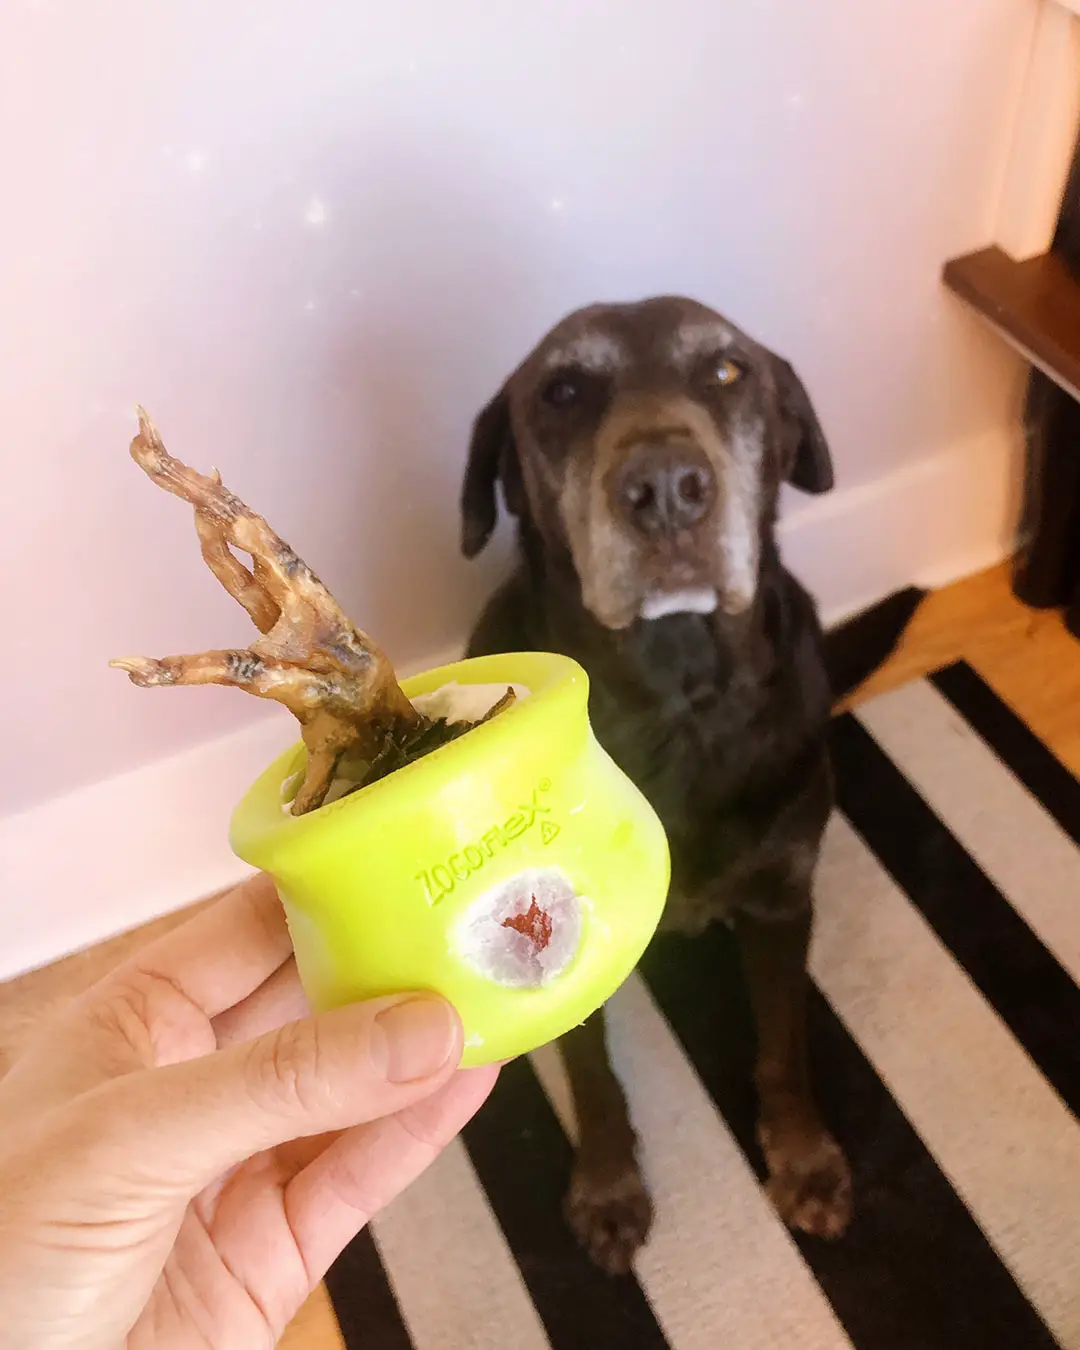 How to Use Toppl Dog Toy